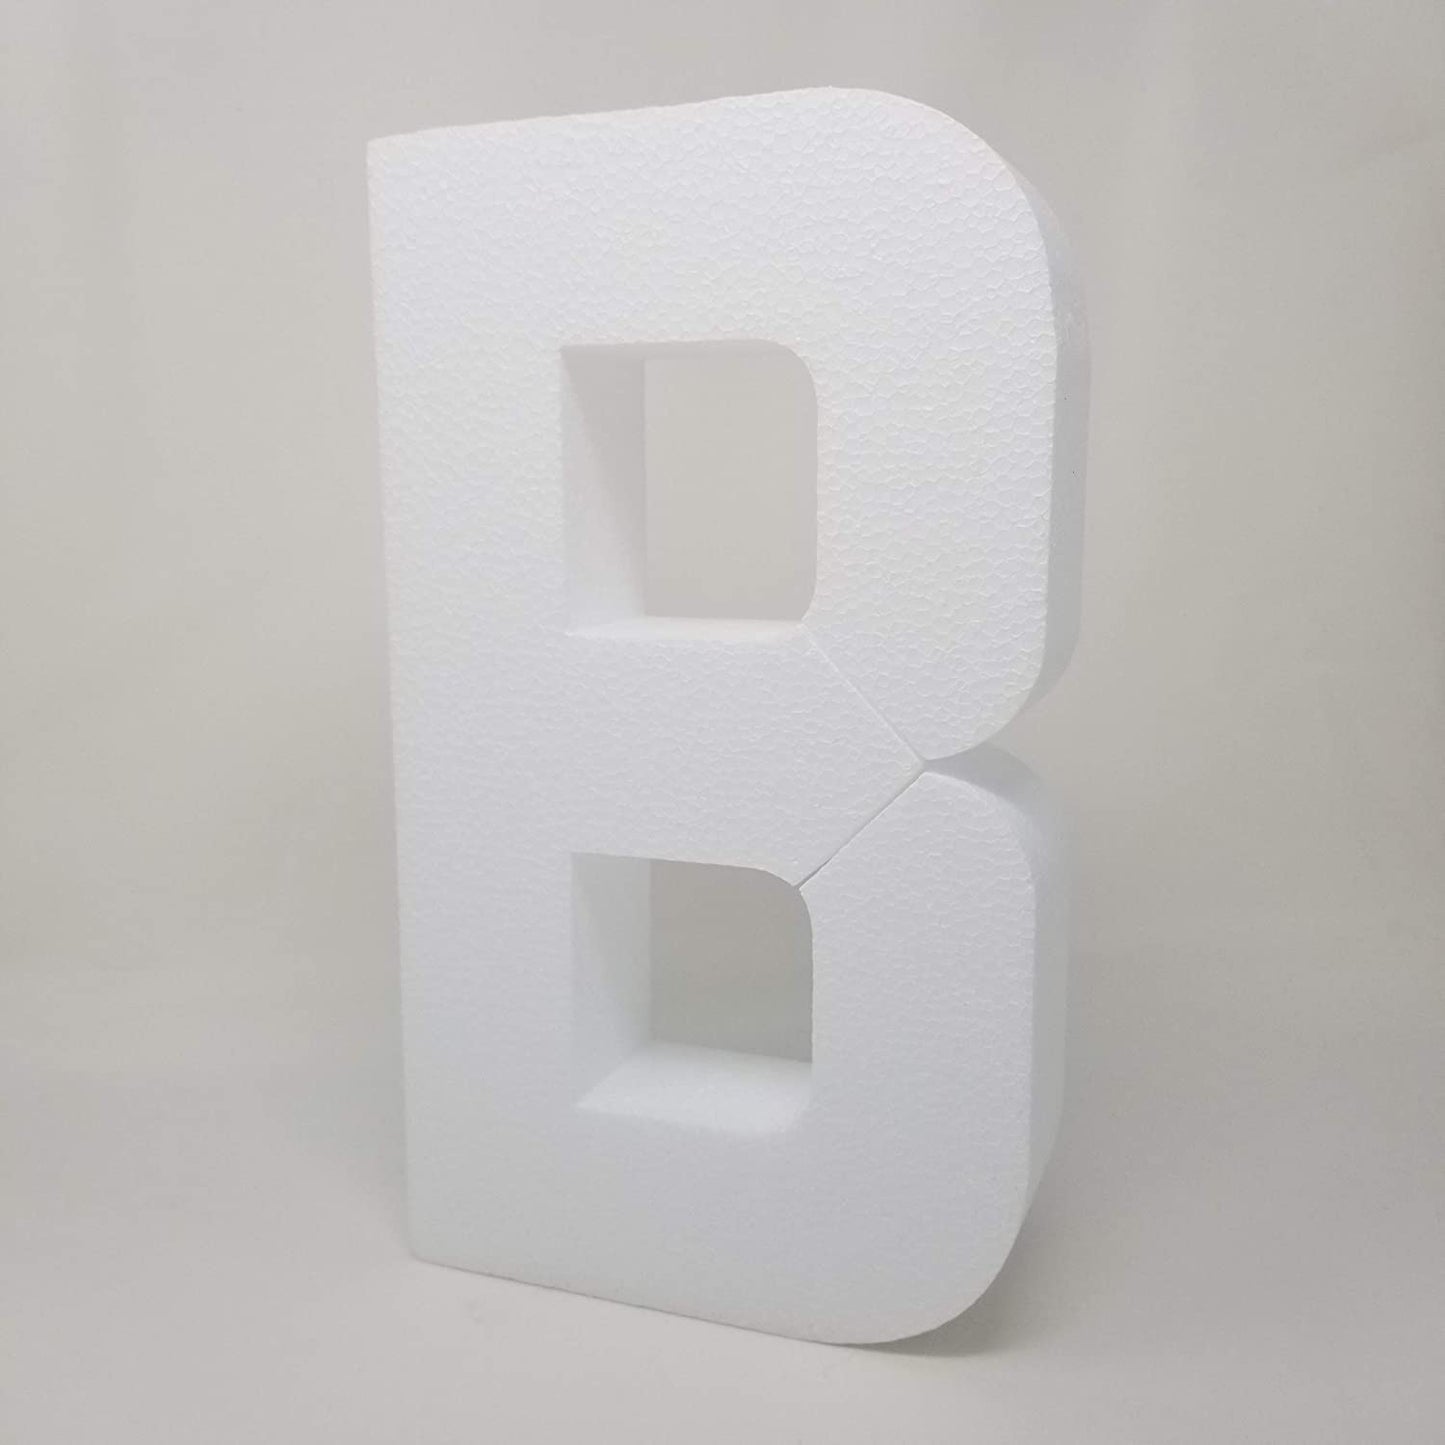 Foam Letter and Number Shapes - 6" Tall